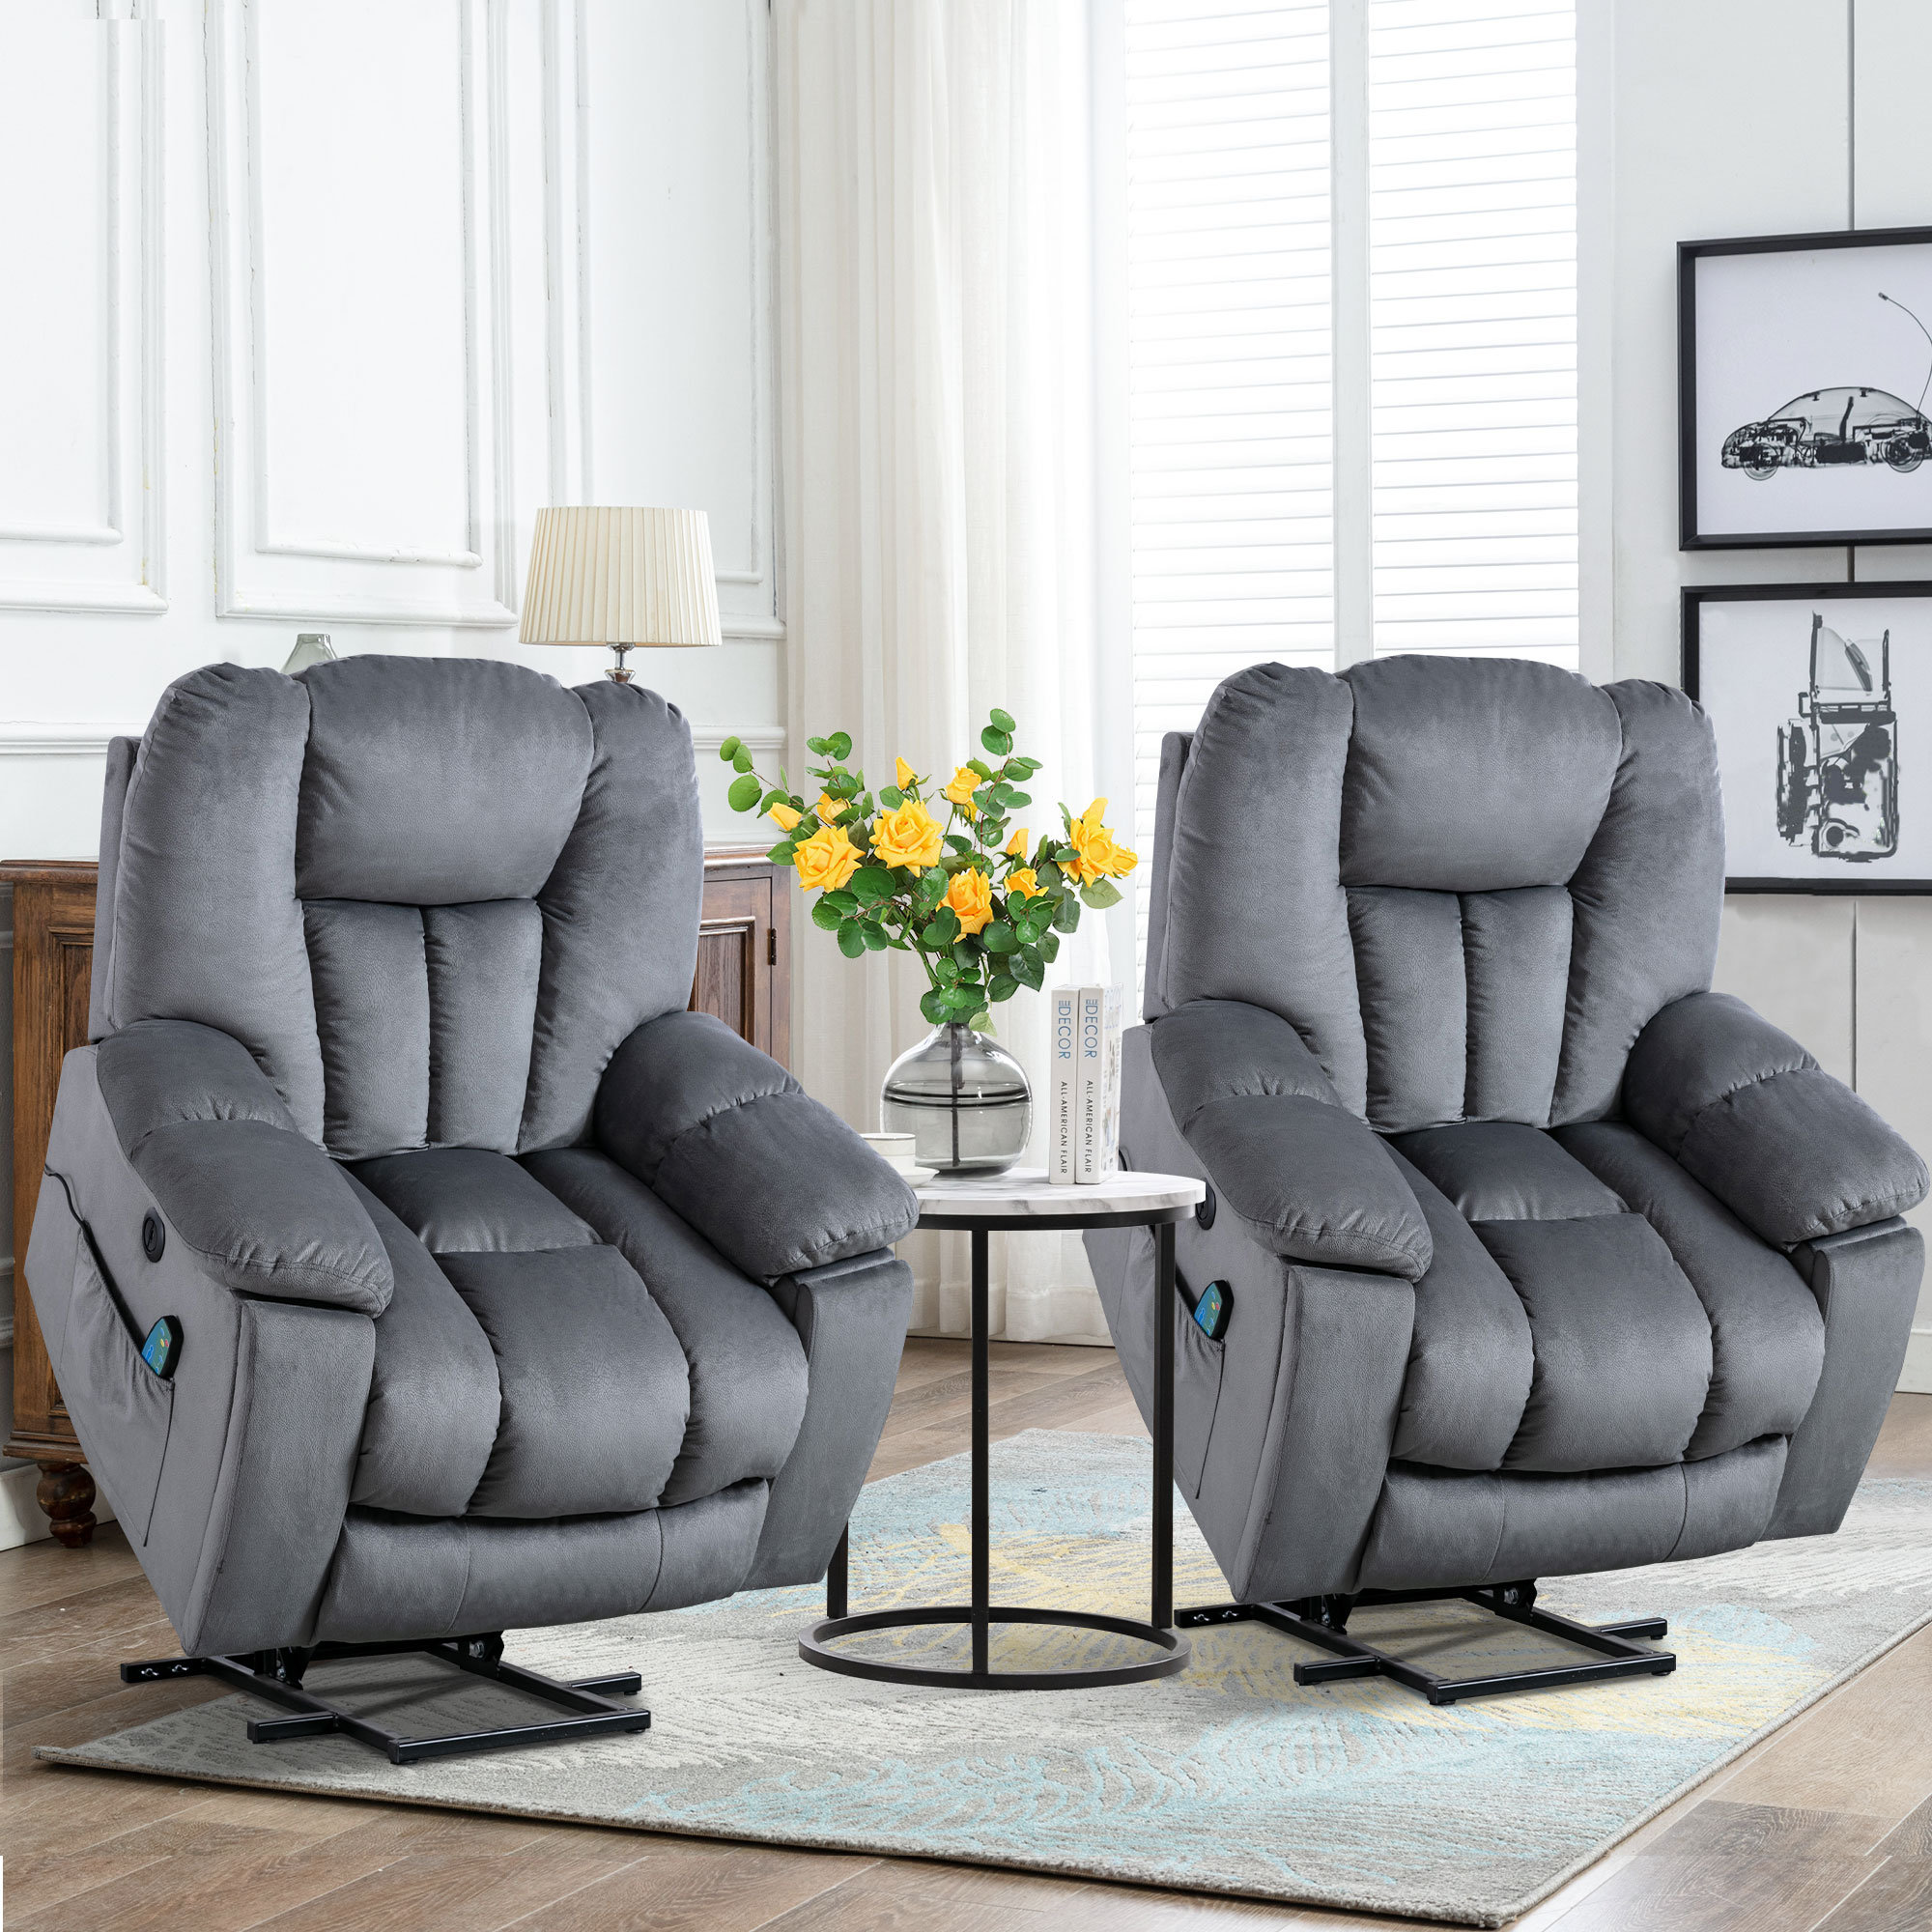 Stoehrs Dual Motor Big Man Recliner Chair Lay Flat in 71.5 Length & 26 Wide Seat, Extra Wide Power Lift Chair 400 lbs Latitude Run Body Fabric: Dar